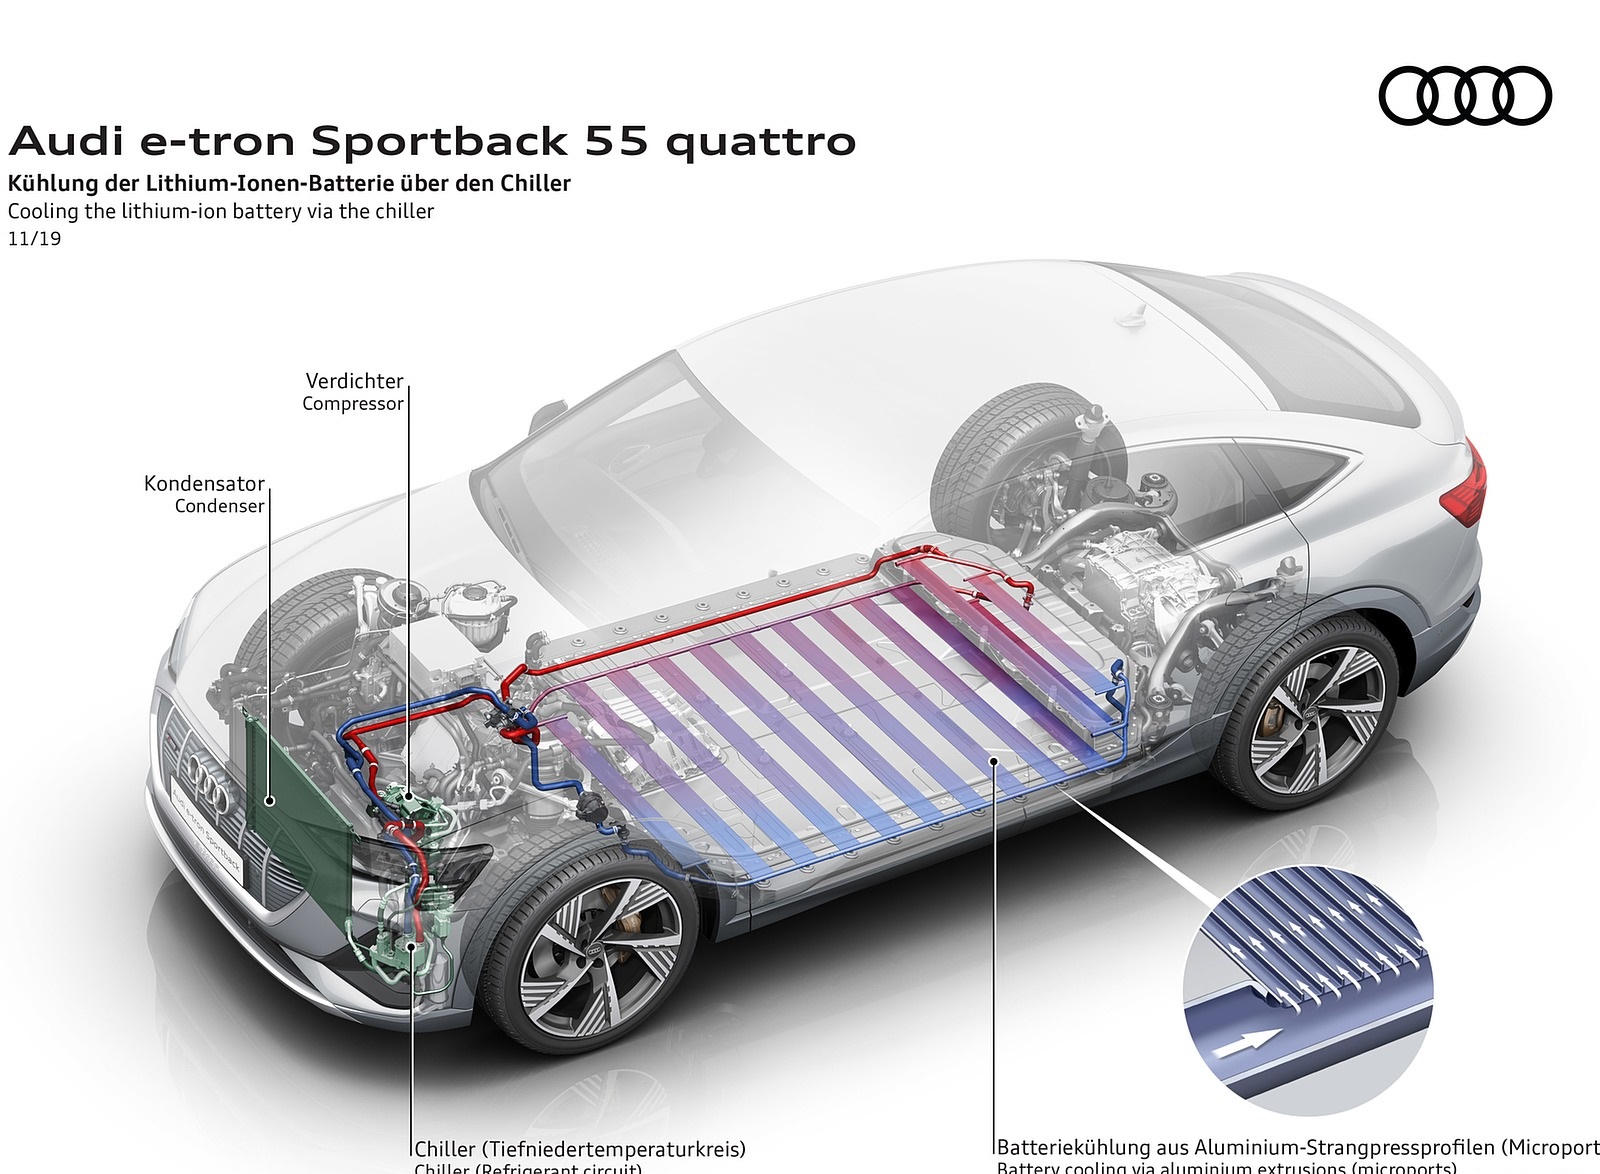 2020 Audi e-tron Sportback Cooling the lithium-ion-battery via the chiller Wallpapers #98 of 145